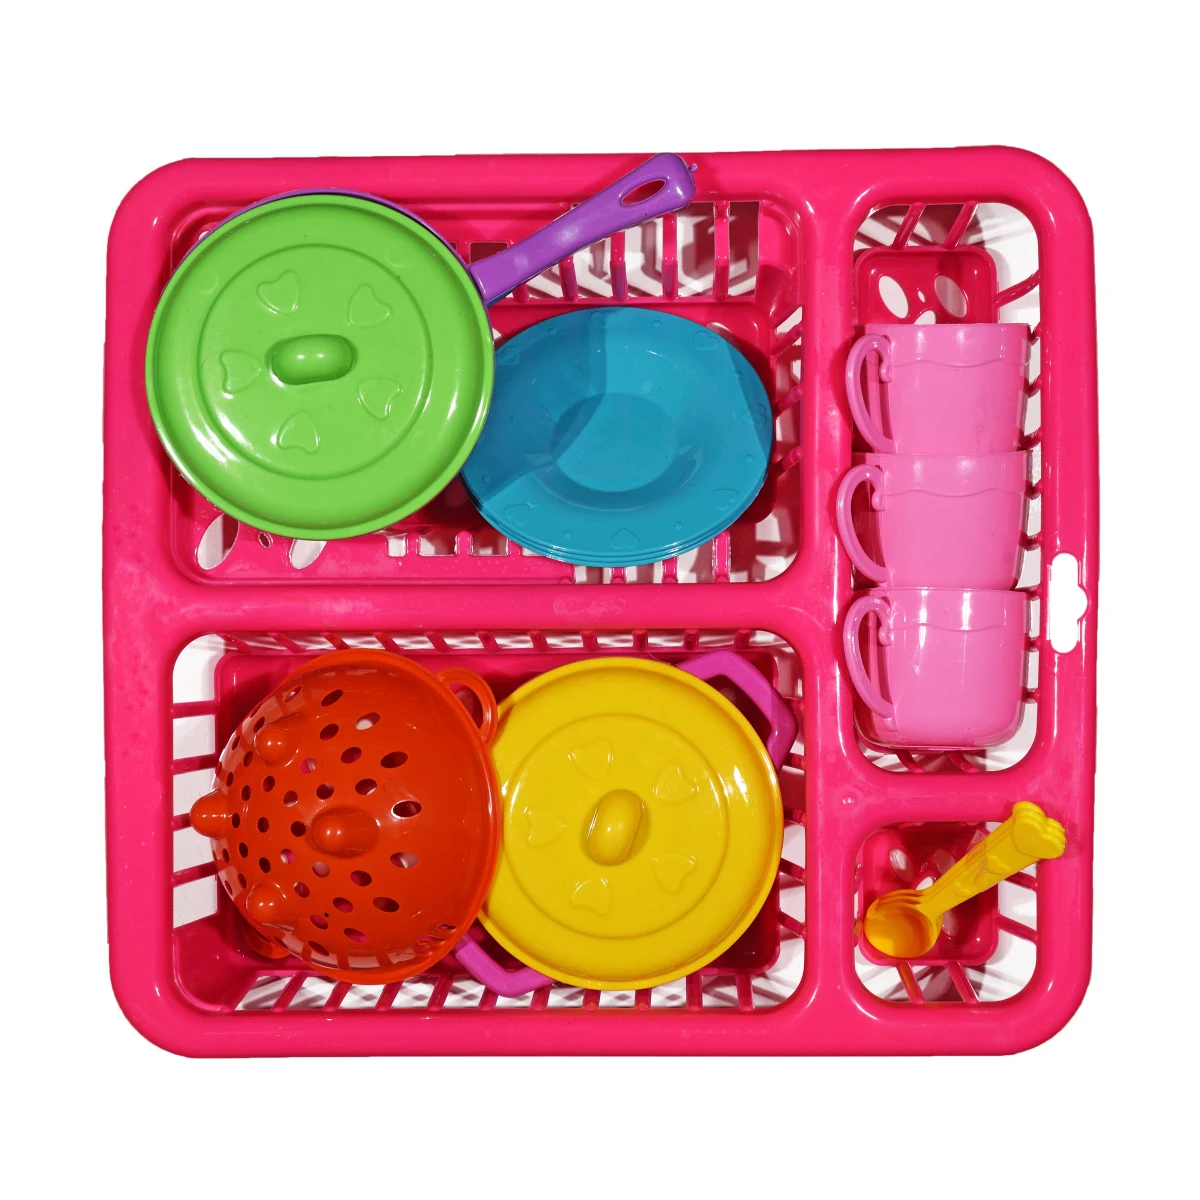 Kitchen Set With Dish Basket Toy Set Made In Turkey Manucafturer Educational Creative Pretend Play Role Play Set  Trend PP Sale